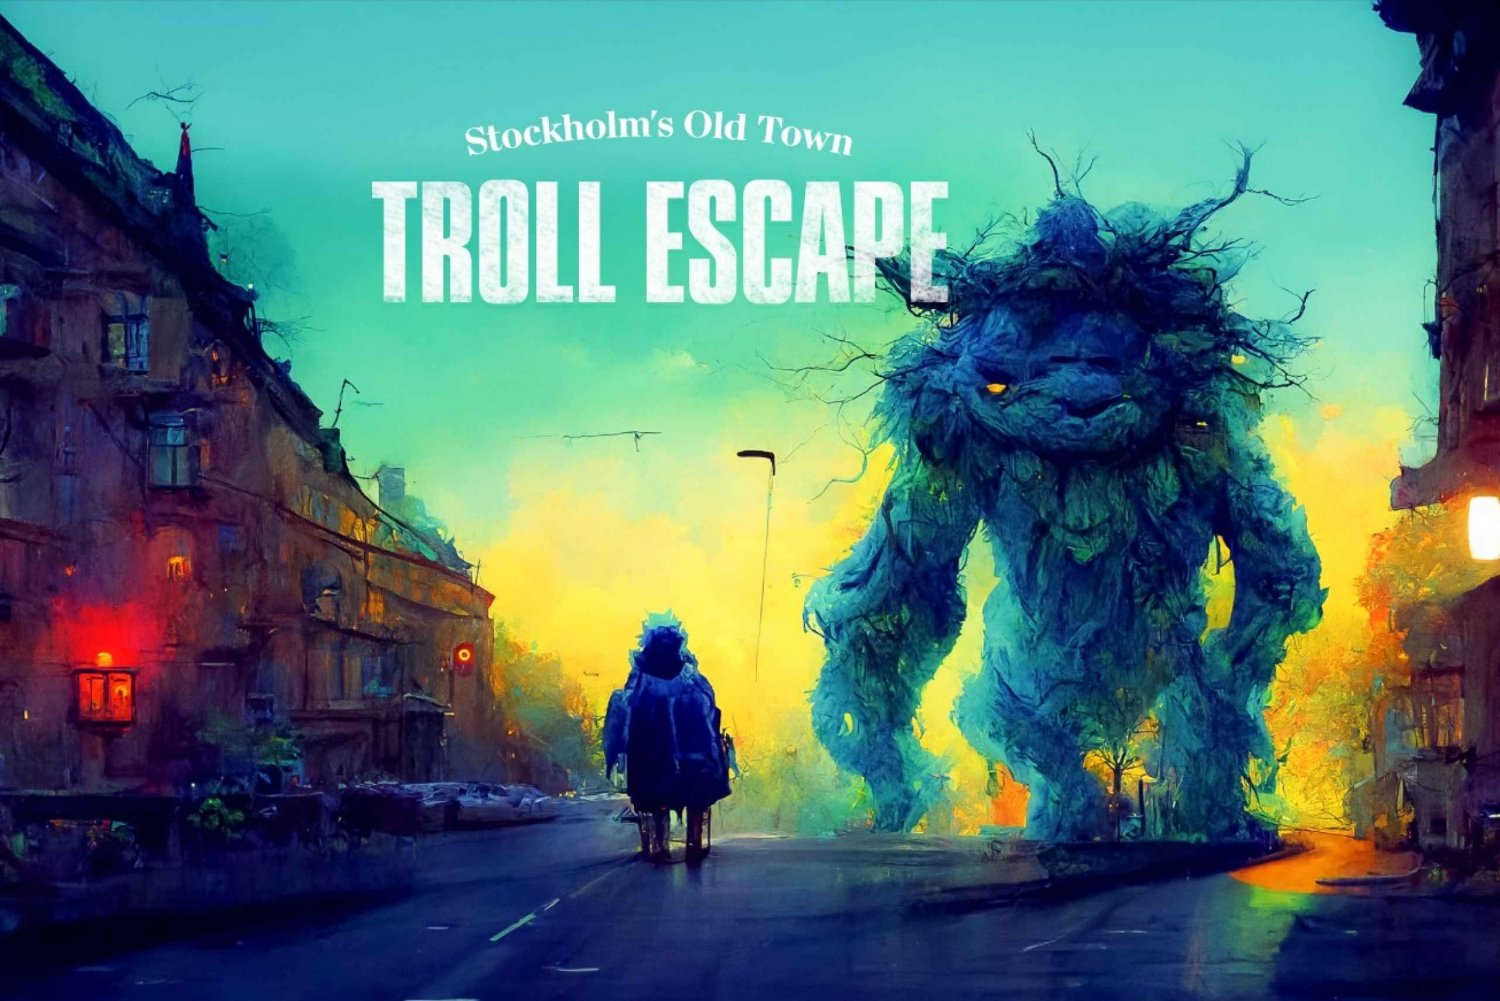 Stockholms gamleby: Troll Escape Quest-opplevelse